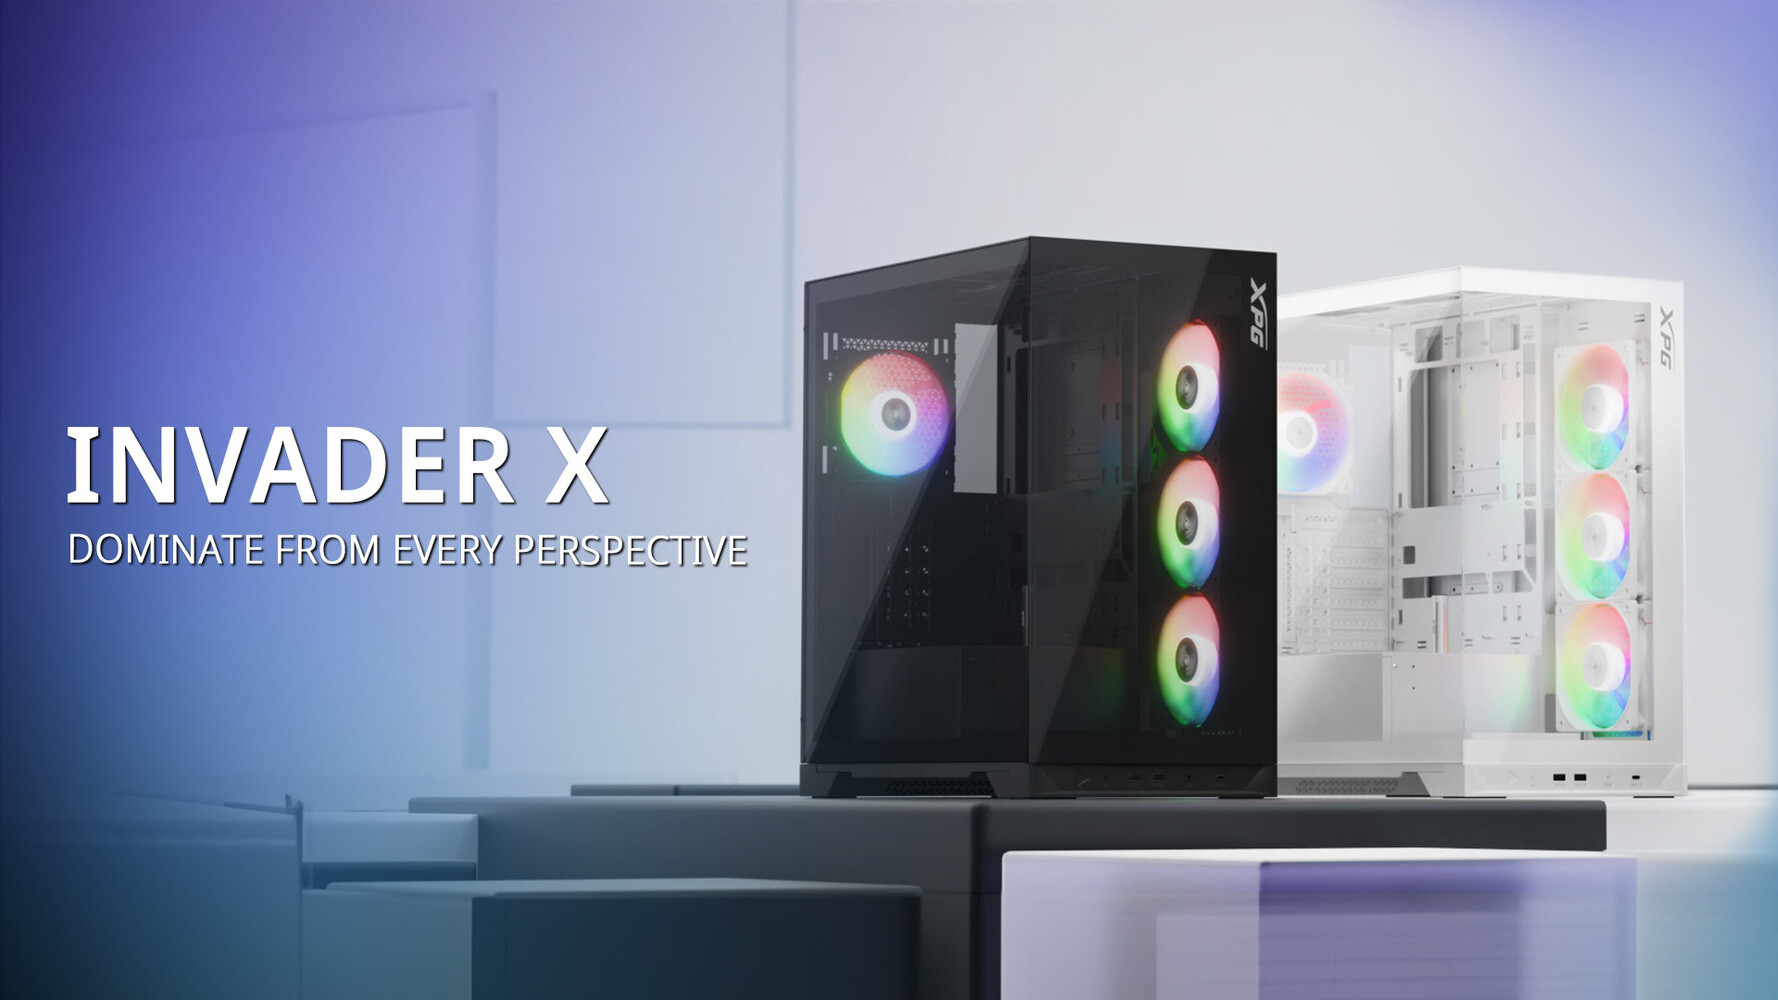 New XPG Invader X Gaming Case by ADATA: Get Your Hands on It